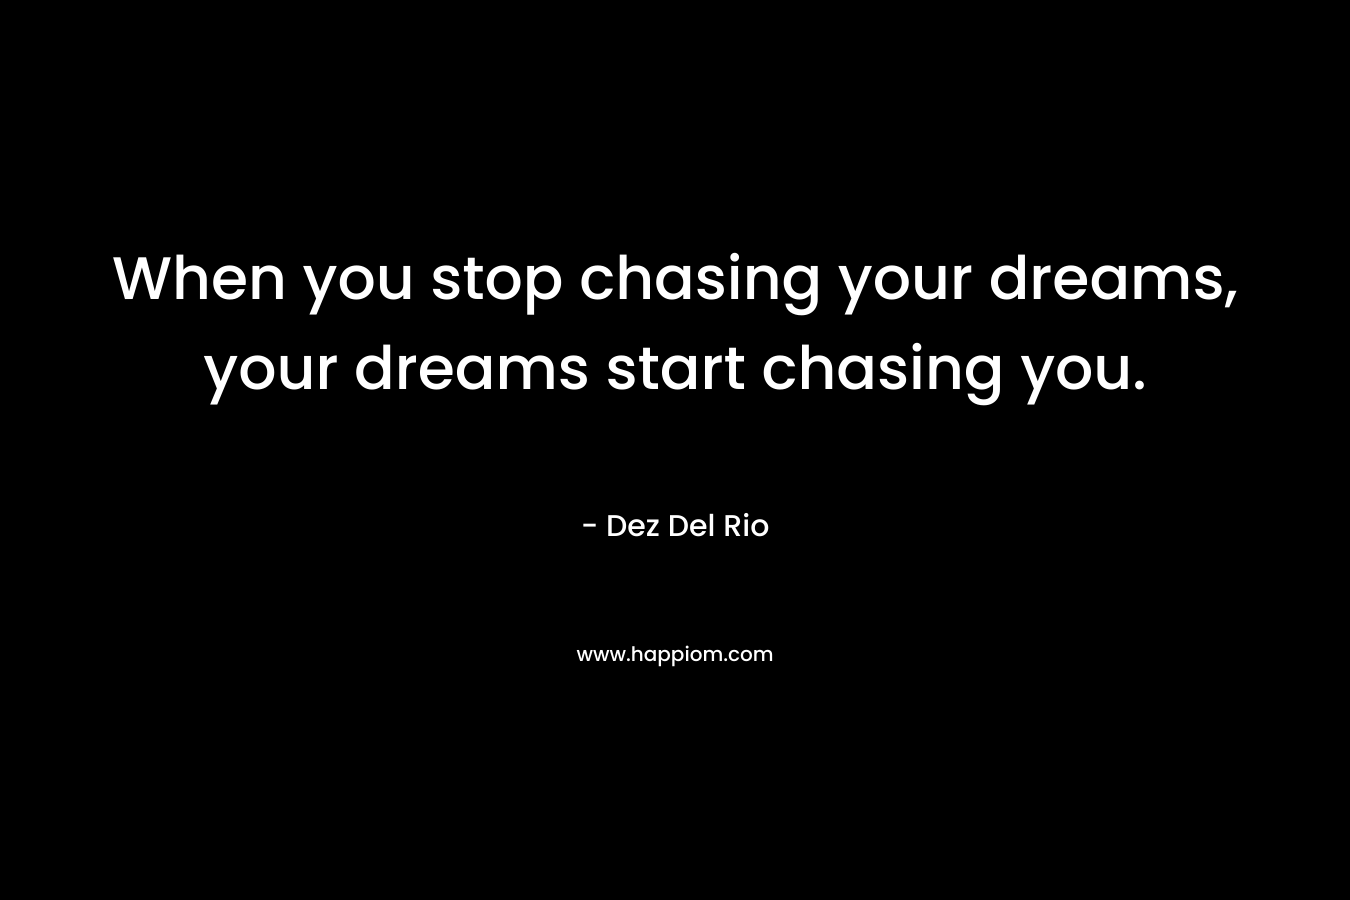 When you stop chasing your dreams, your dreams start chasing you.